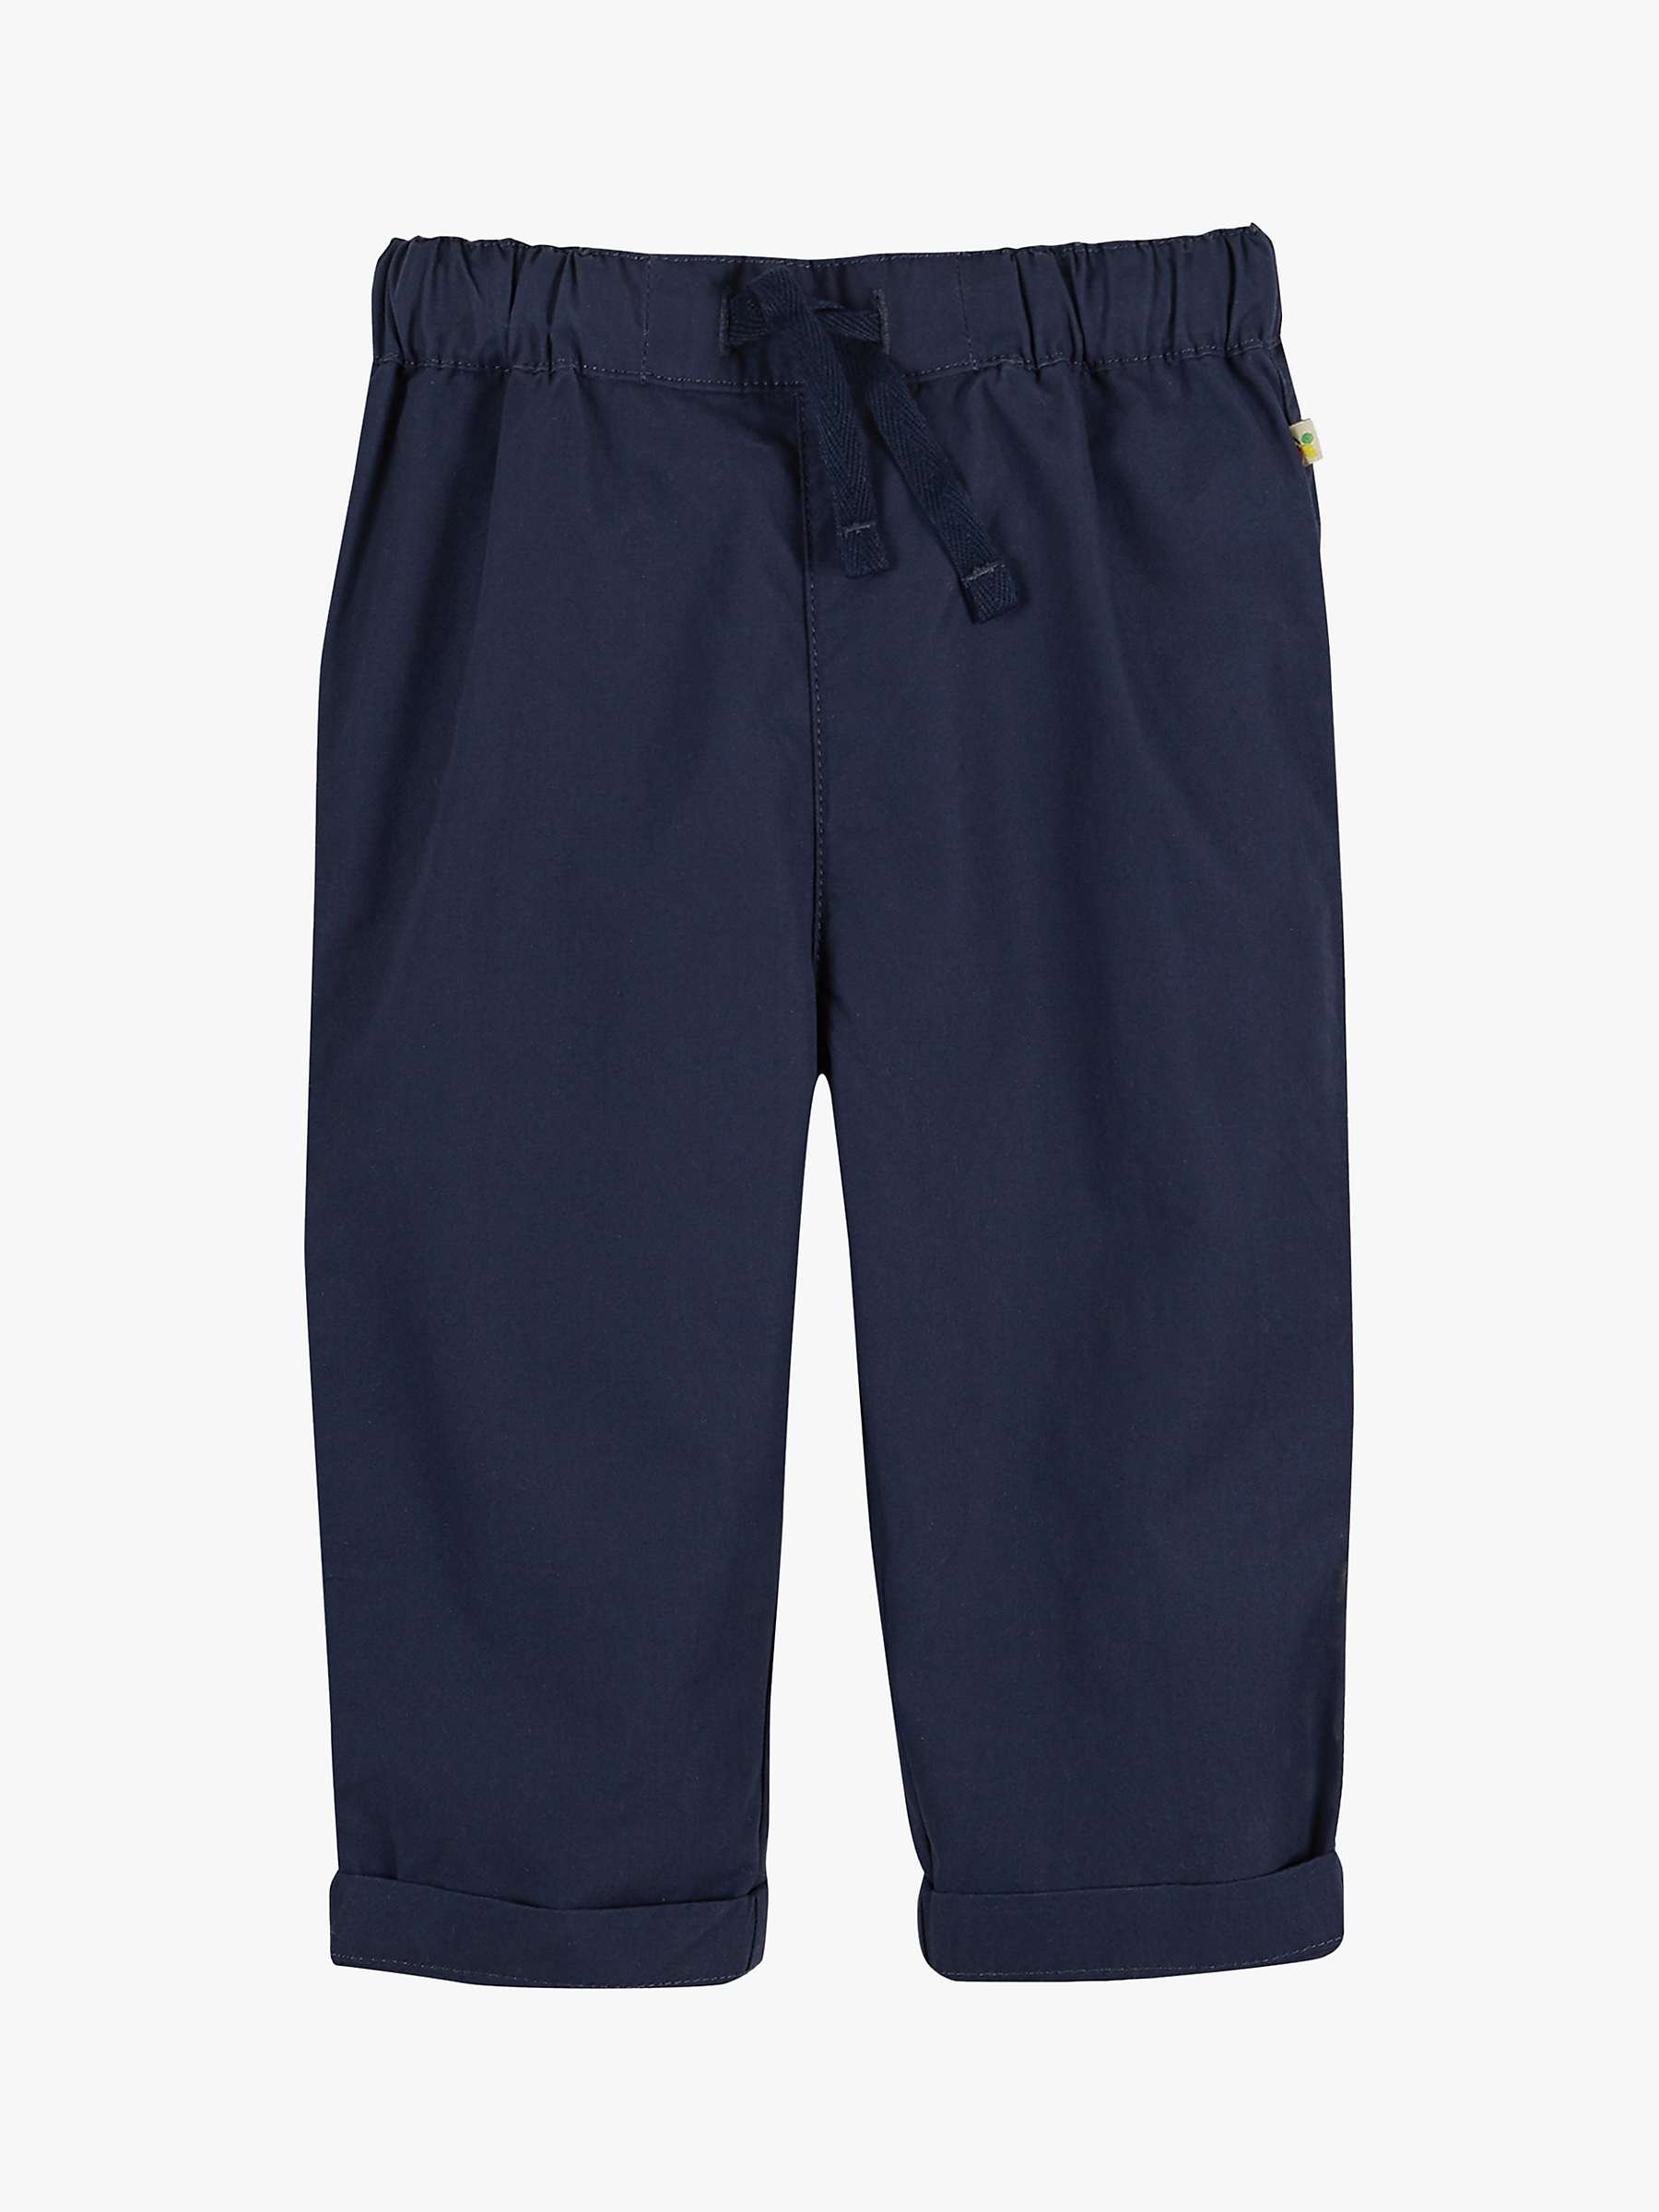 Buy Frugi Baby Tommy Organic Cotton Trousers, Indigo Online at johnlewis.com